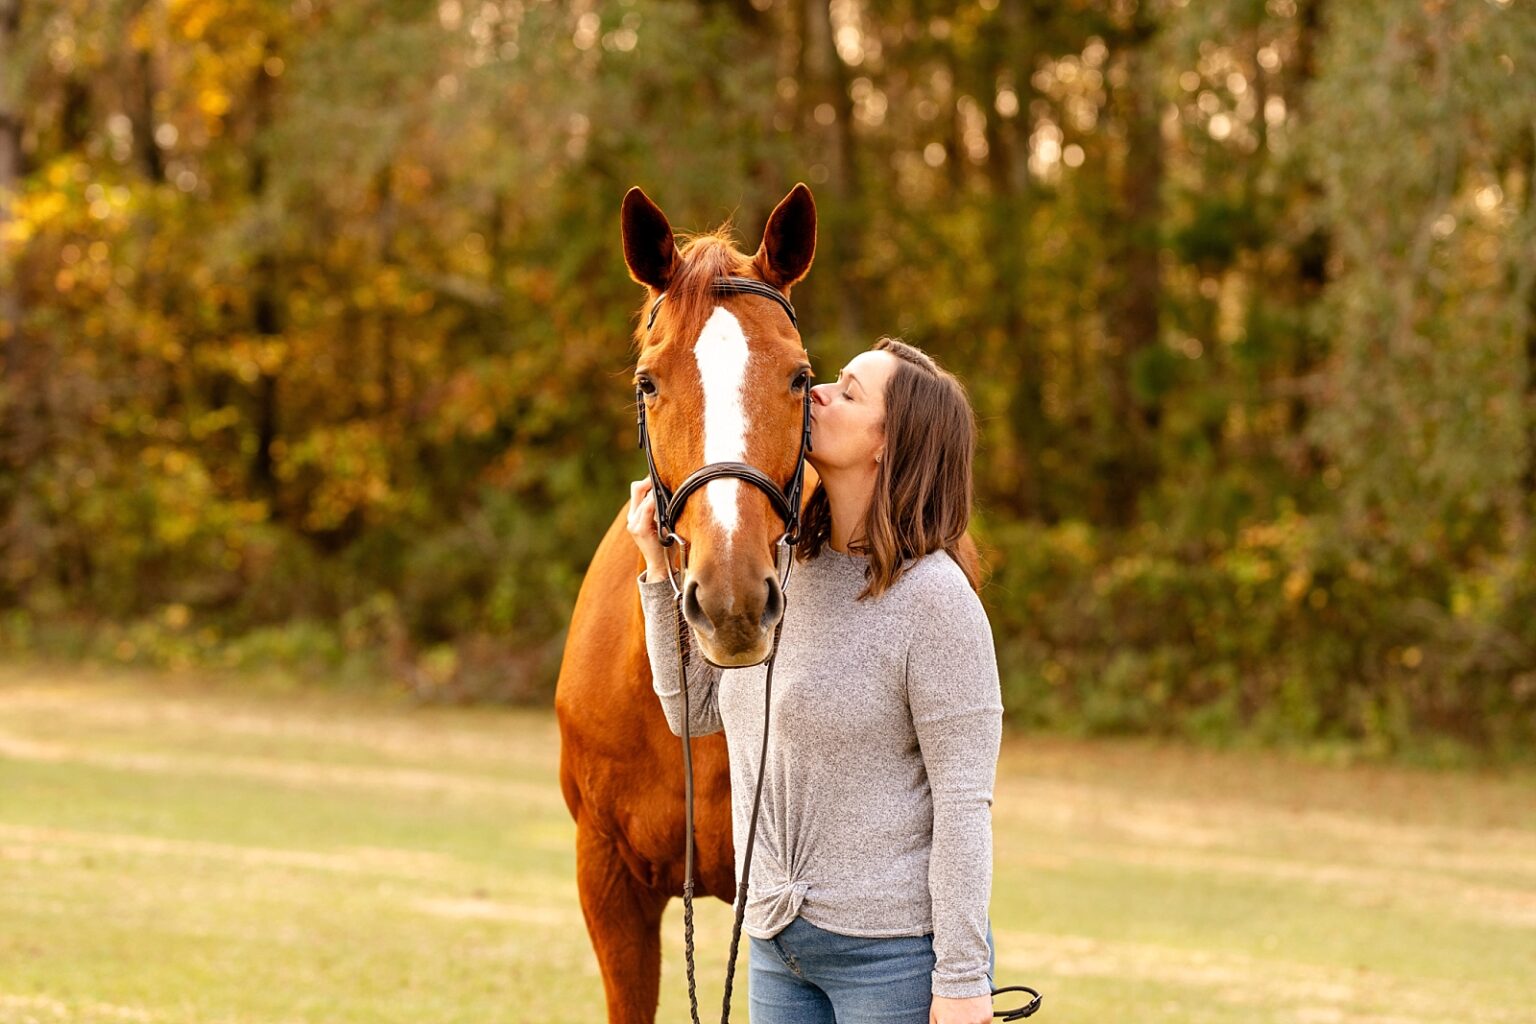 Horse and rider portrait photographer in Florida and the southeast. Photos with your horse. Posing ideas for photos with your horse. Tallahassee, FL. Cavallo Farms.